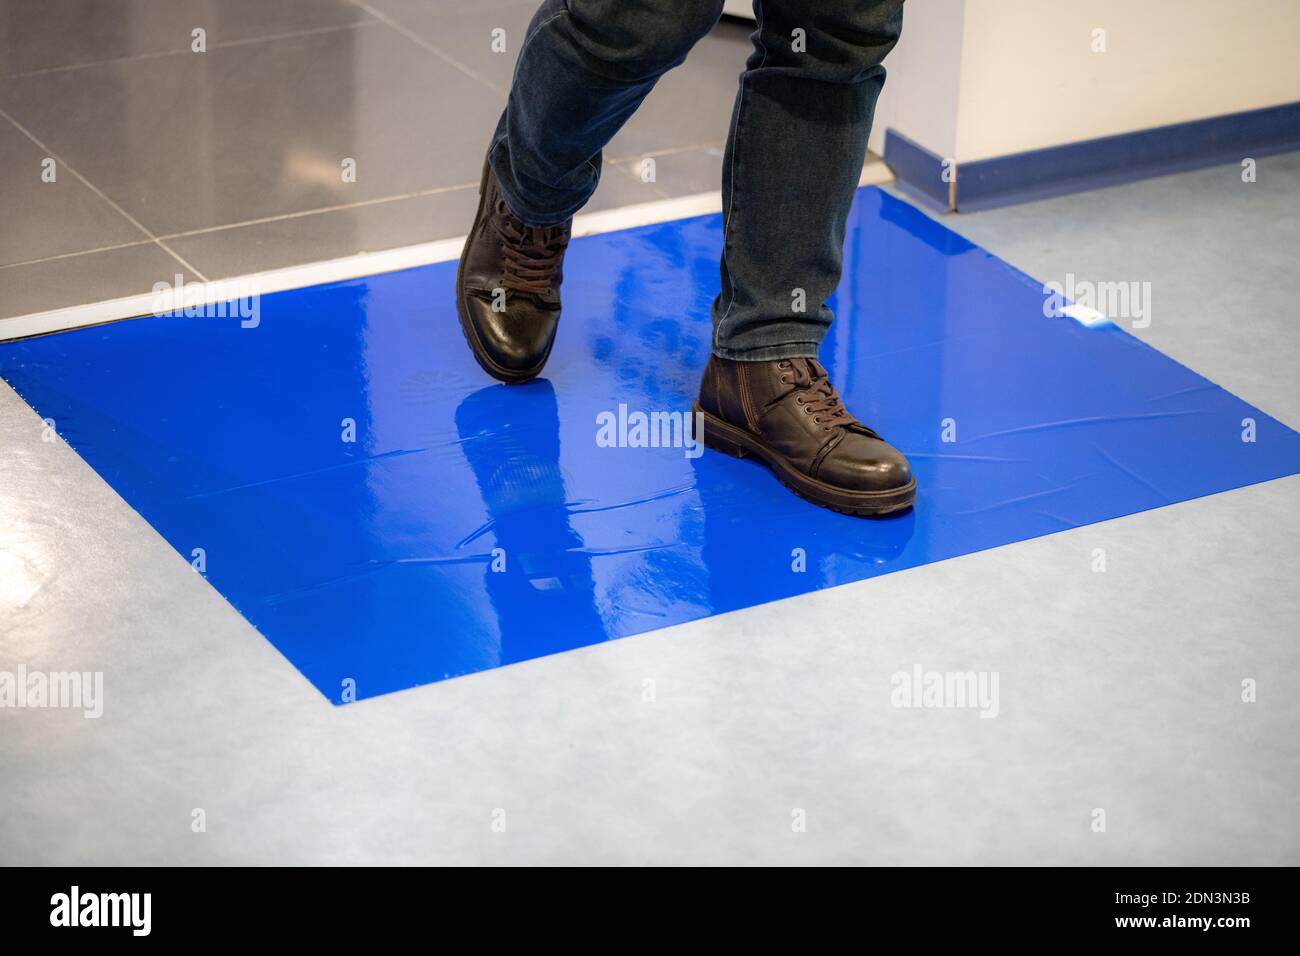 Man in brown shoes stepping on blue Adhesive Sticky Mats. Stock Photo